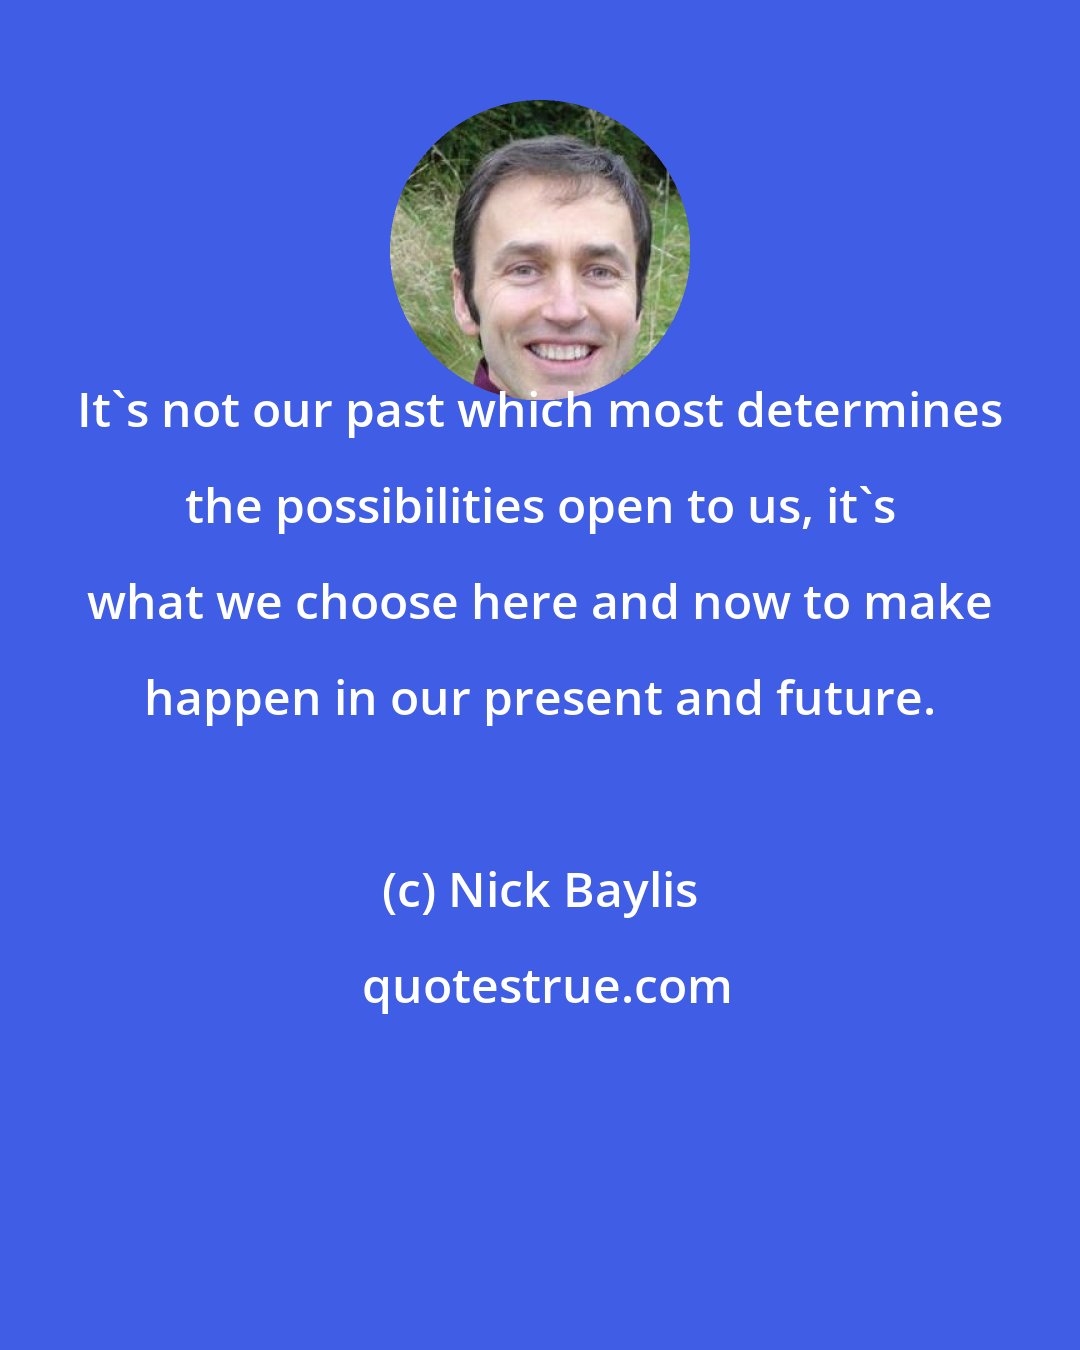 Nick Baylis: It's not our past which most determines the possibilities open to us, it's what we choose here and now to make happen in our present and future.